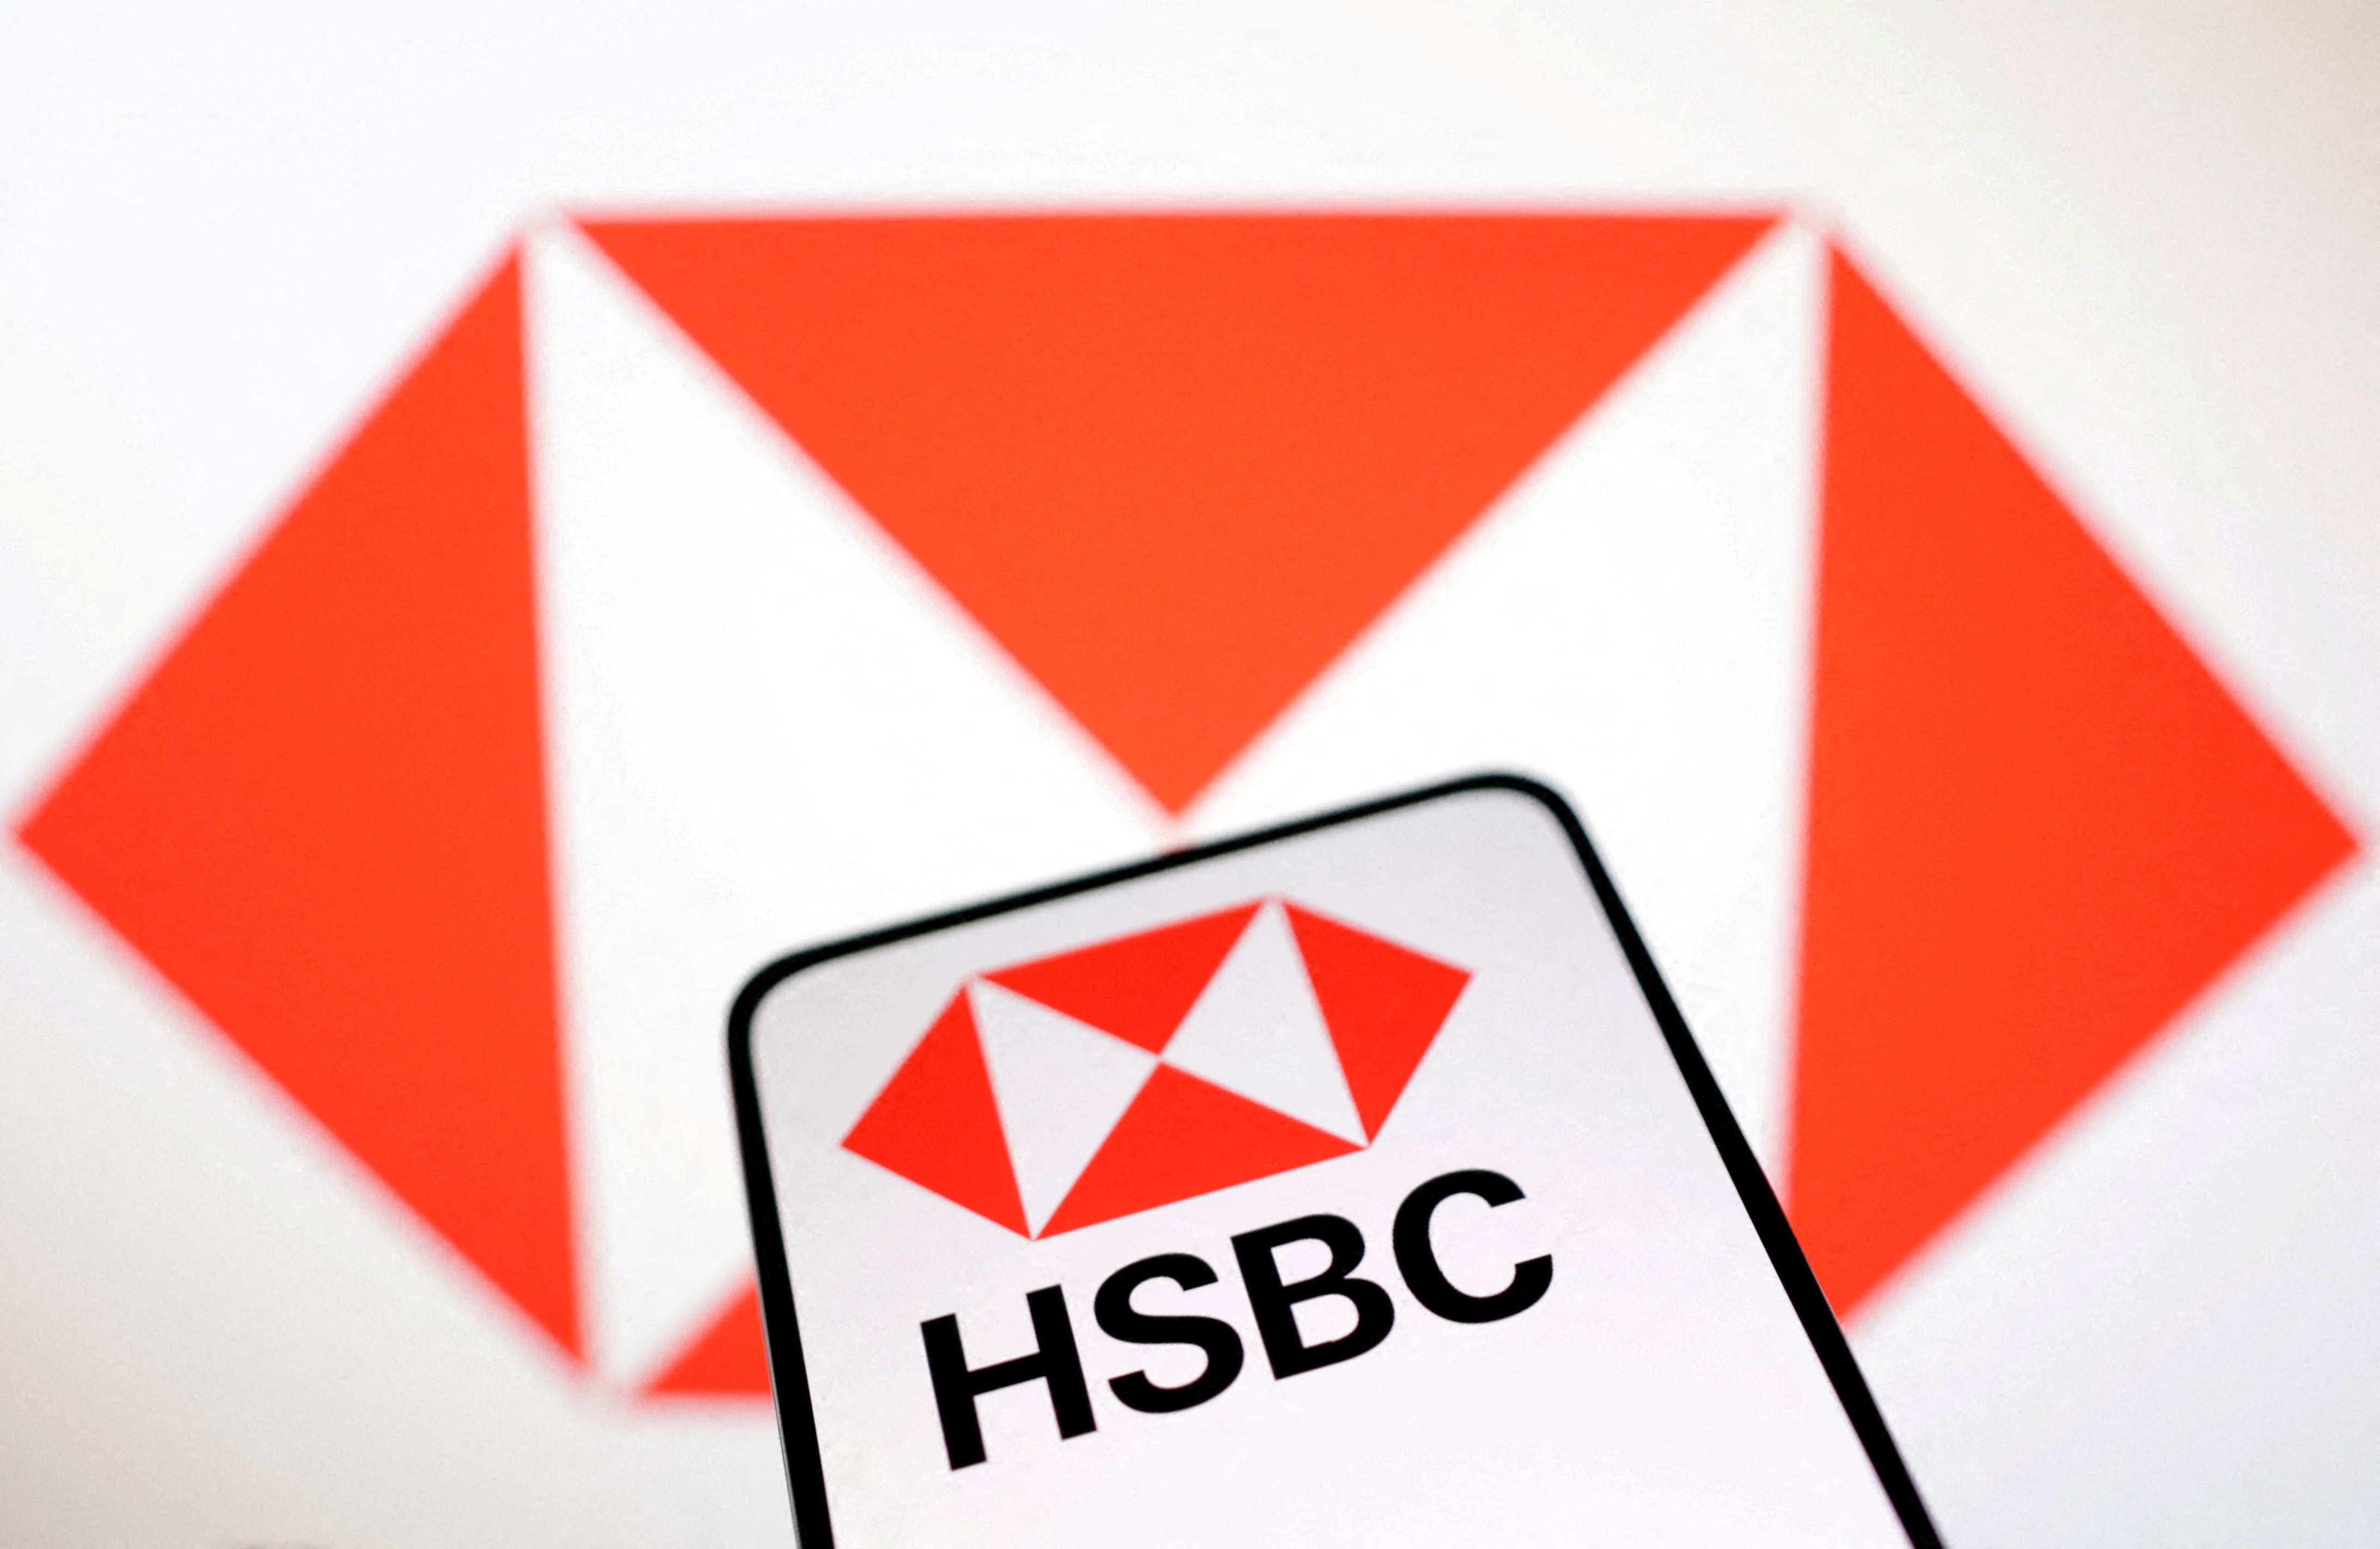 HSBC has apologised to customers left locked out of their online banking